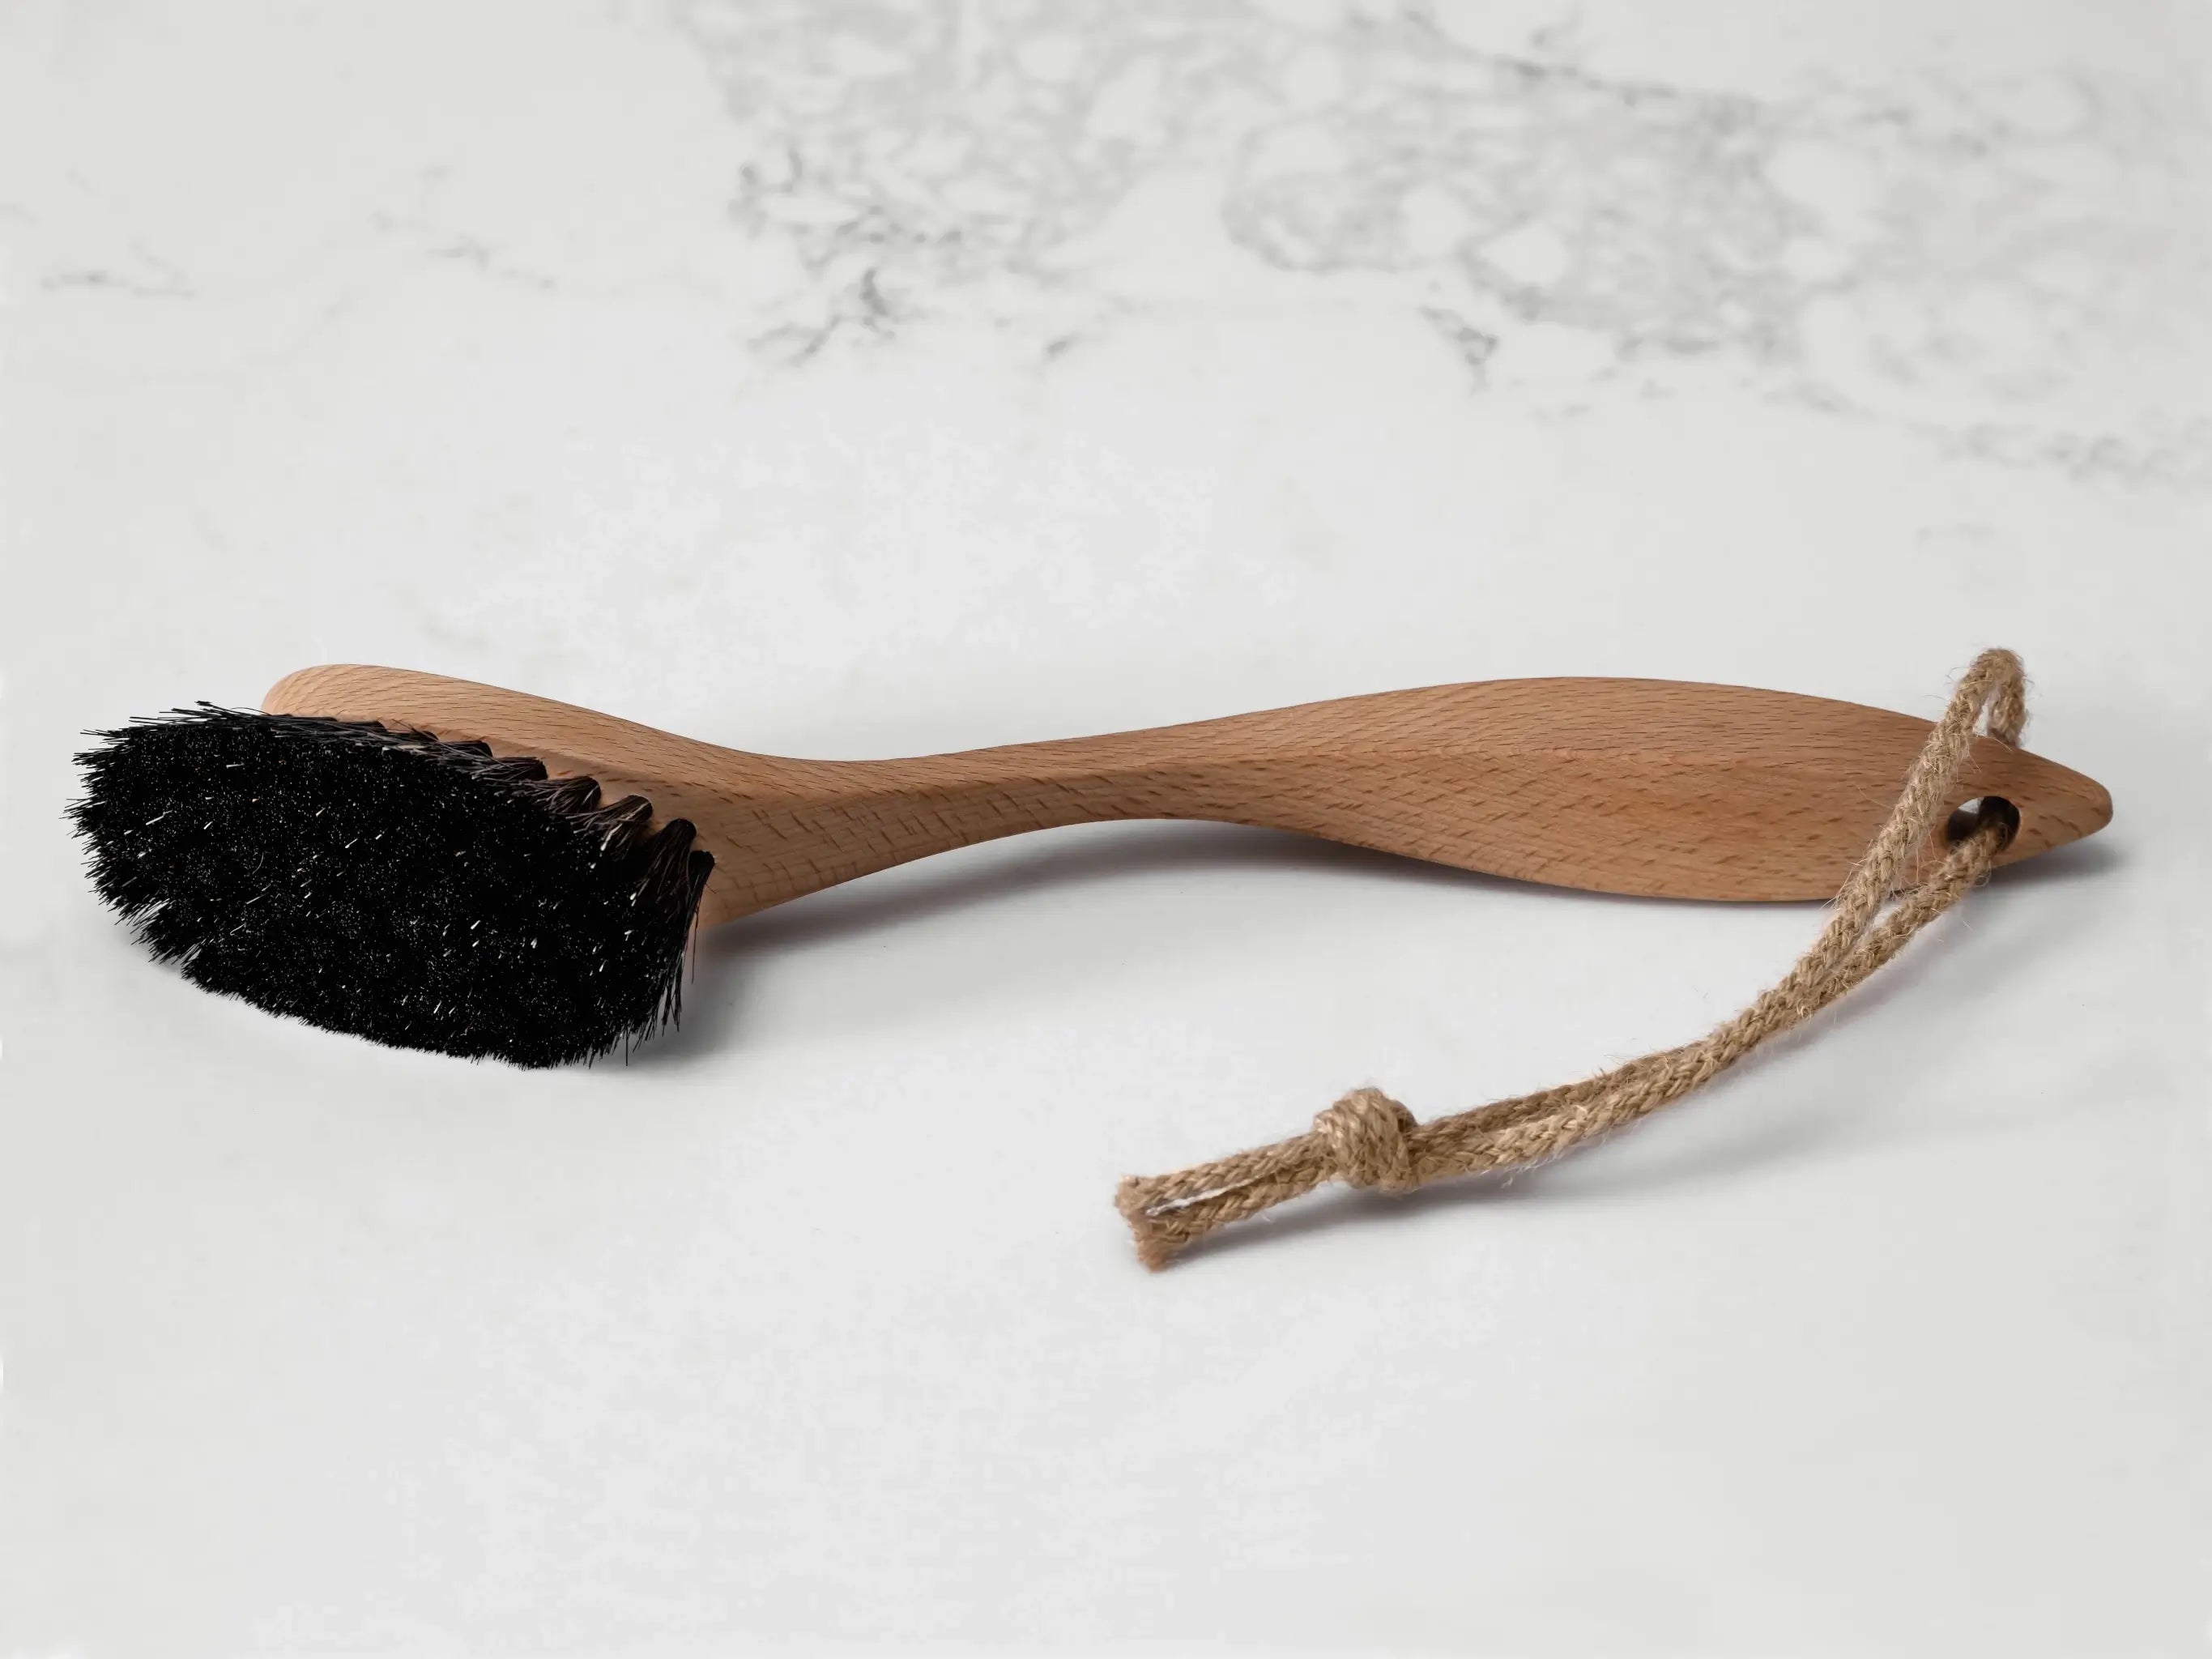 A long handled wooden dish brush with dark bristles and a hanging loop sit on a marbled surface. Made by UK makers Hillbrush